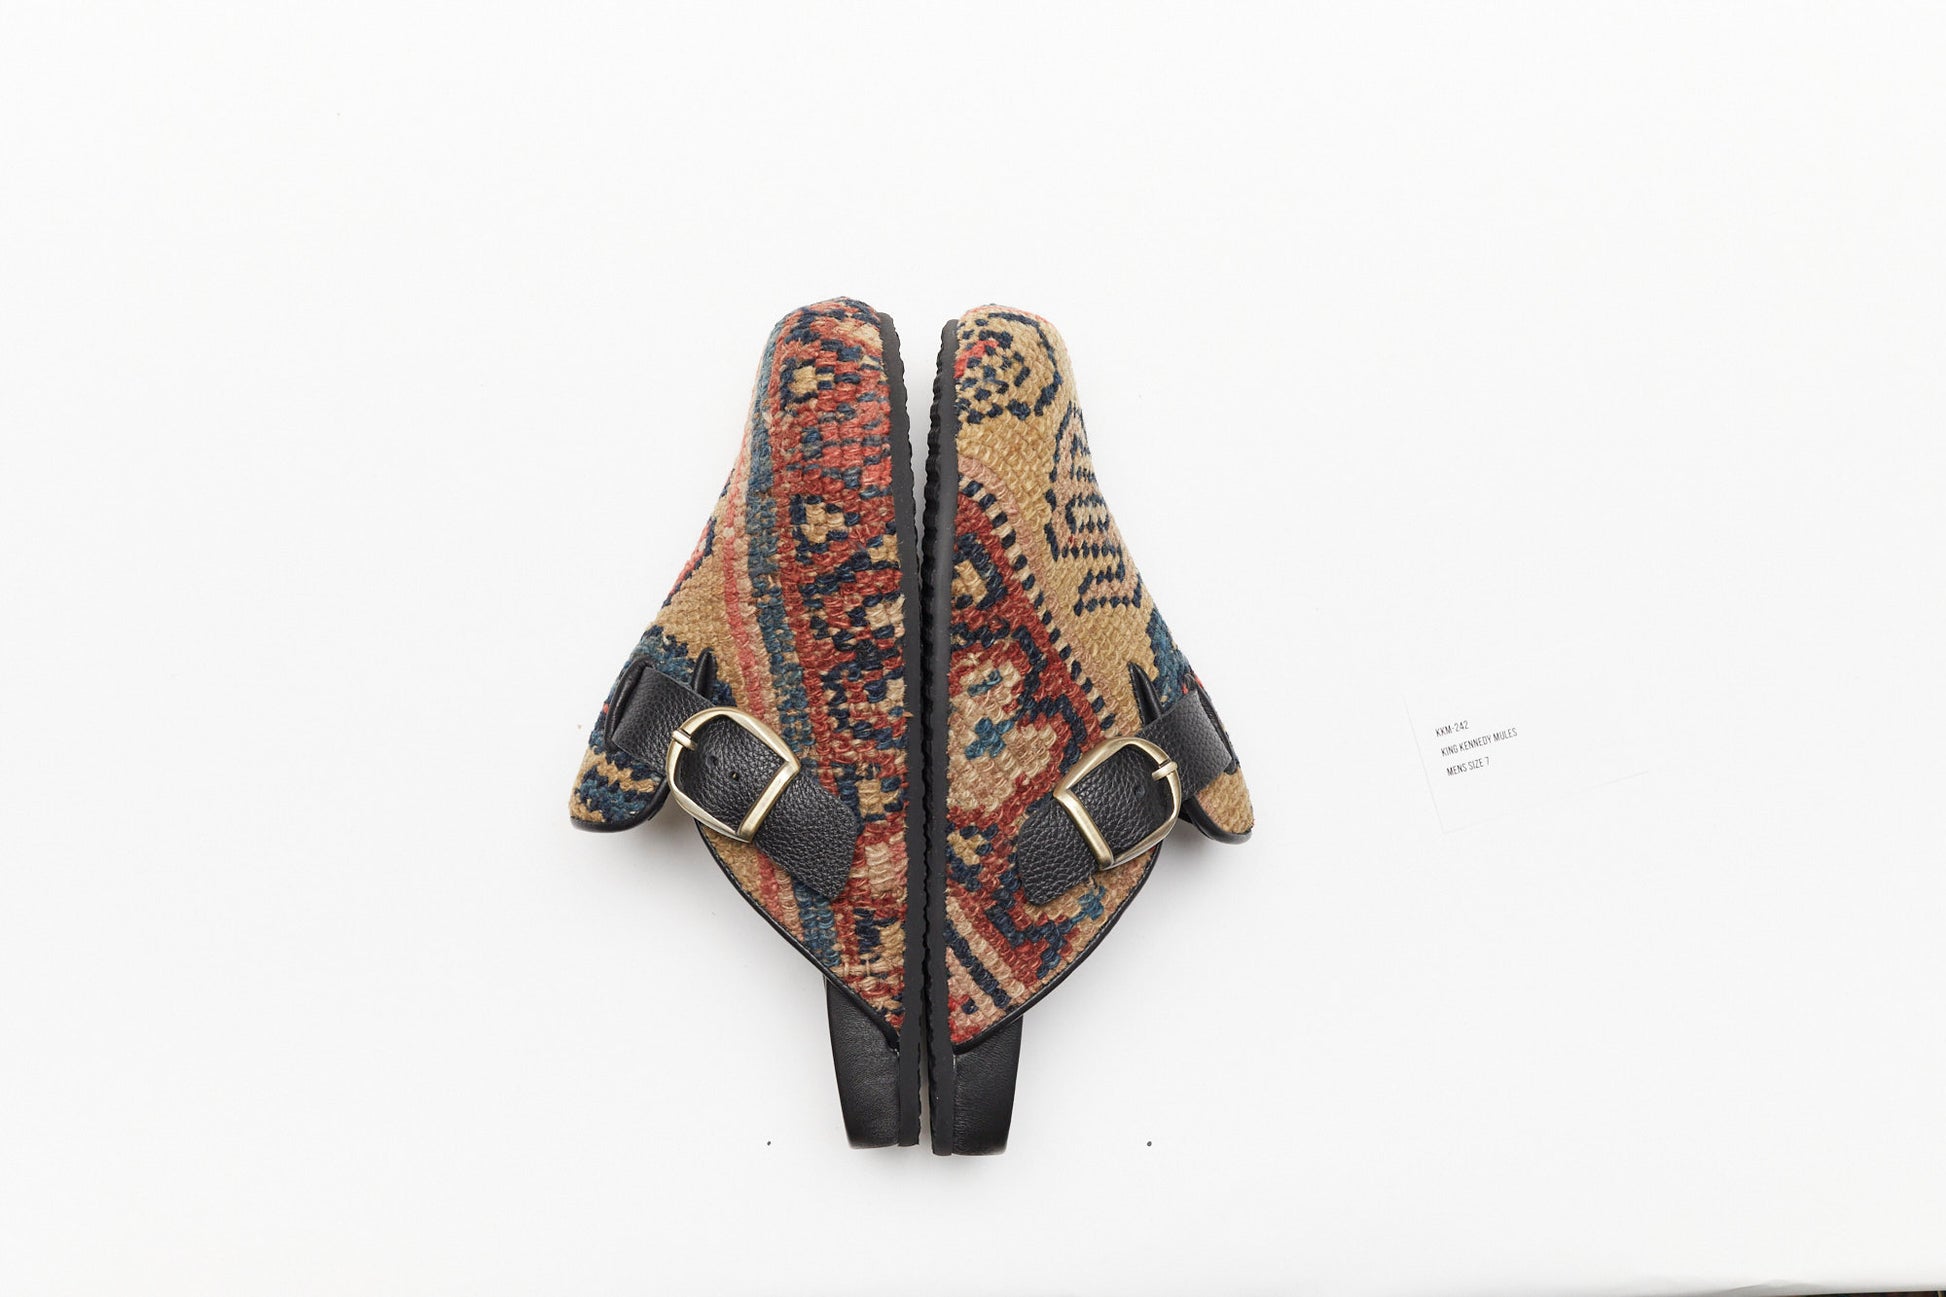 Buckle side view of rug mules. Side view of rug mules. This pair of King Kennedy Rug Mules are one-of-a-kind and made of 100 year old antique Persian rug fragments with soft lambskin footbed and rubber sole.  This pair is made of a taupe, beige rug with pale red and blue designs.  